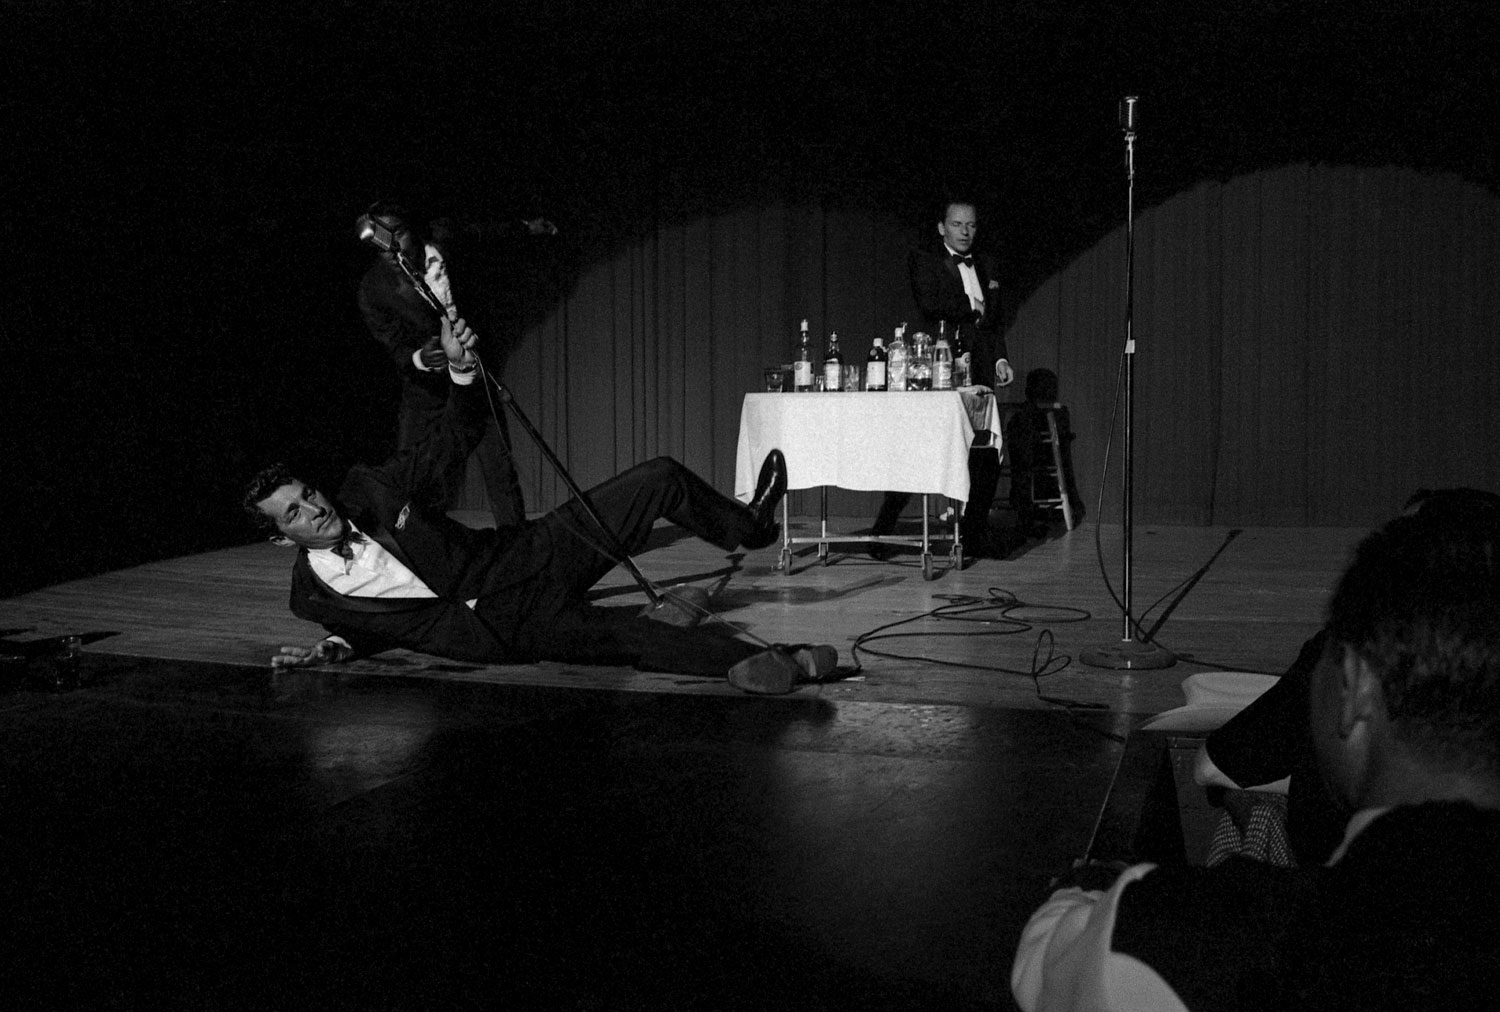 Dean Martin, Sammy Davis Jr., and Frank Sinatra pretend to be drunk on stage for a charity event in 1960.